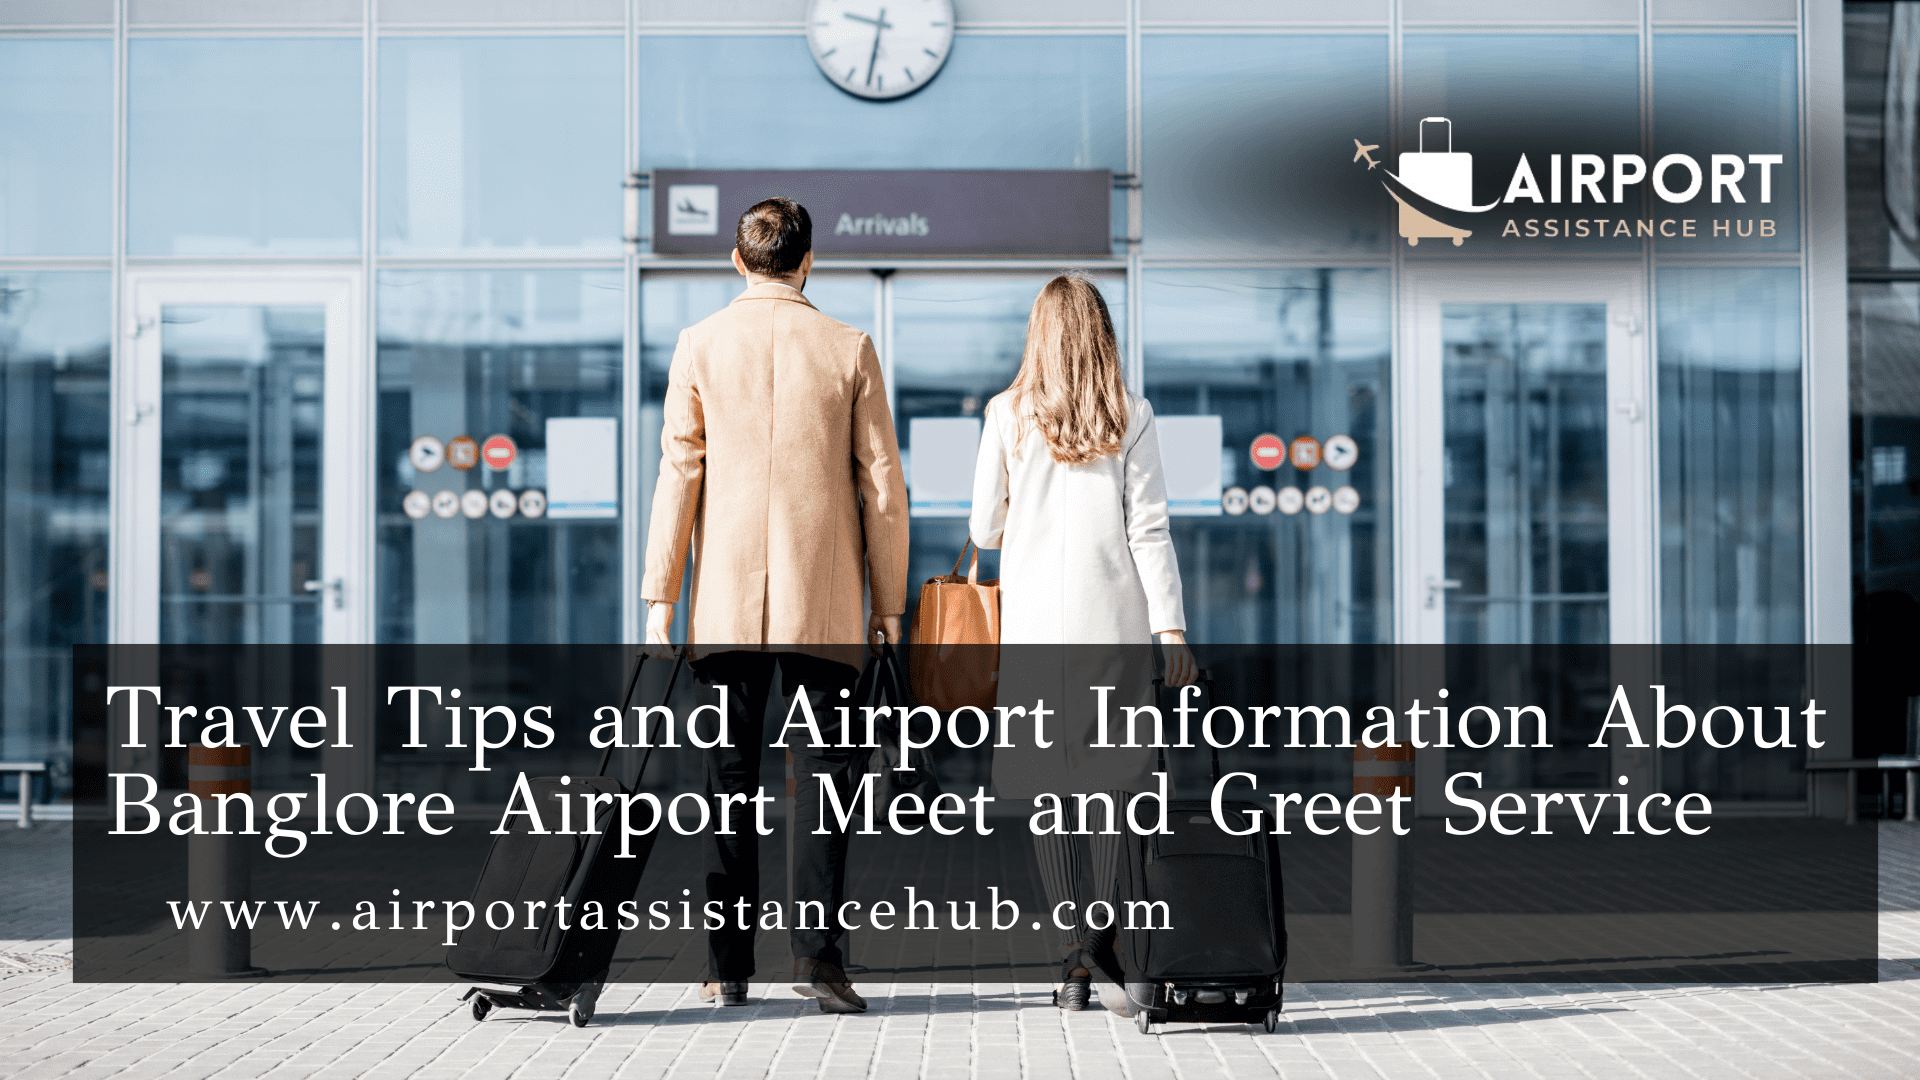 Travel Tips and Airport Information About Bangalore Airport Meet and Greet Service